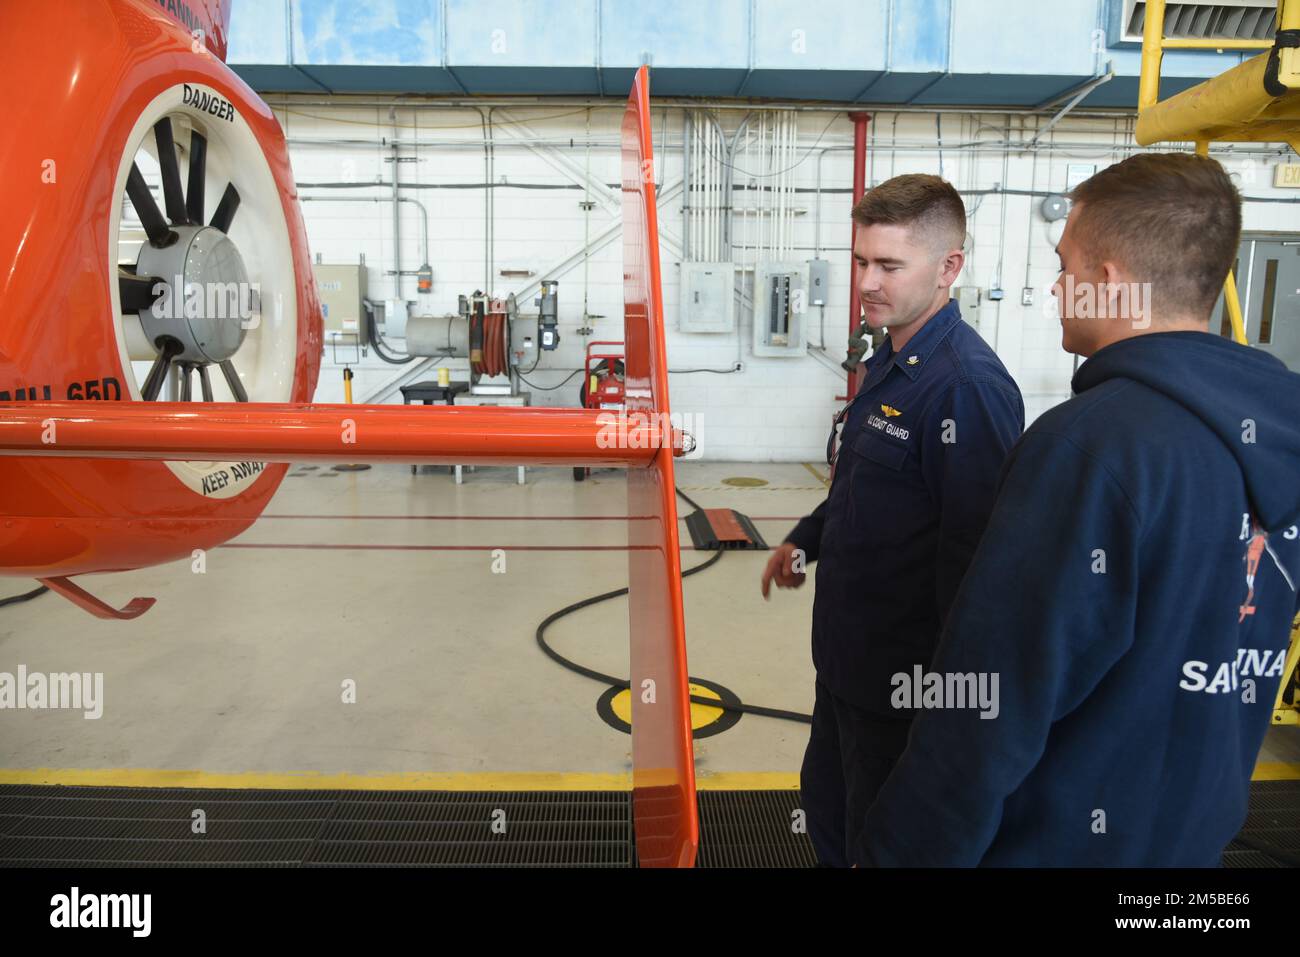 U.S. Coast Guard Petty Officer 3rd Class Bryce Kitchen (left), an aviation maintenance technician, and Airman Michael Rustine, both assigned to the aviation engineering department at Coast Guard Air Station Savannah, Georgia, conduct an inspection on an MH-65 dolphin helicopter, Feb. 21, 2022. Air Station Savannah's area of responsibility cover approximately 450 miles of shoreline from the northern border of South Carolina to Melbourne, Florida. Stock Photo